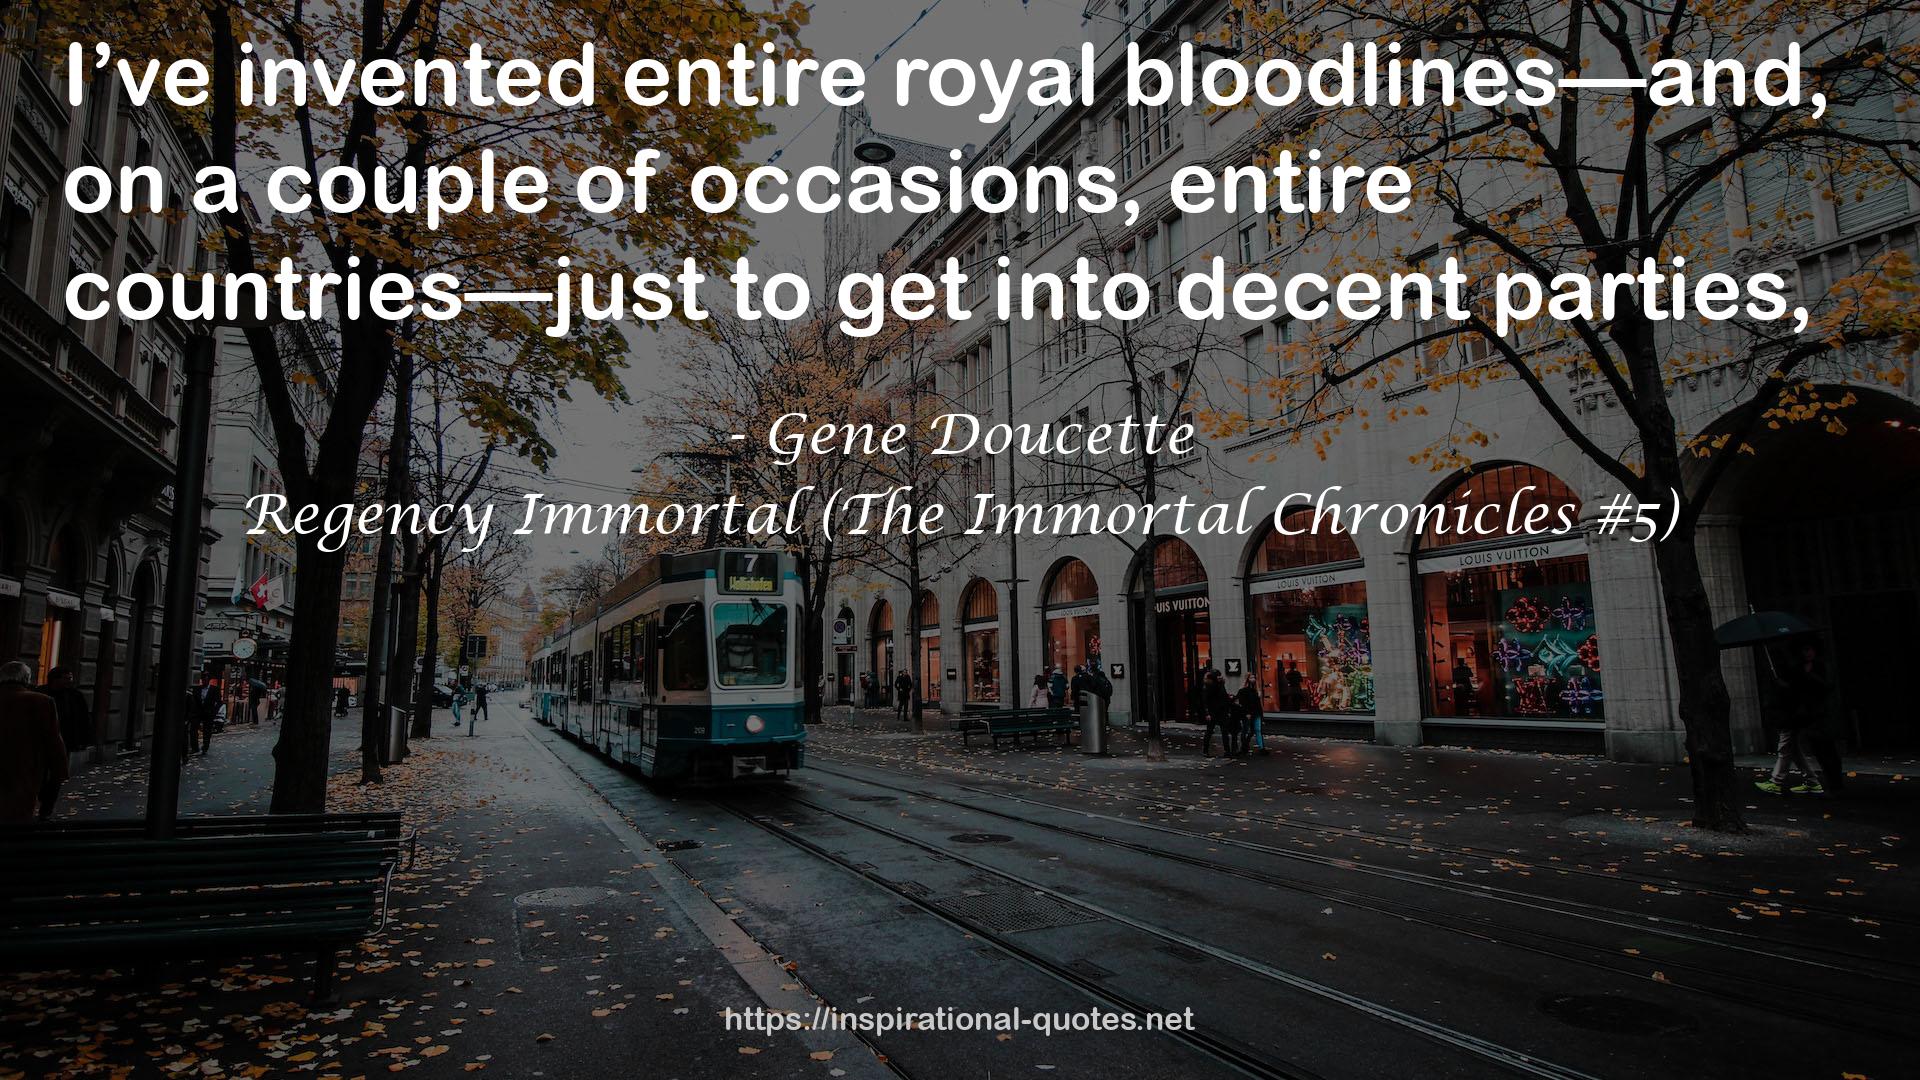 Regency Immortal (The Immortal Chronicles #5) QUOTES